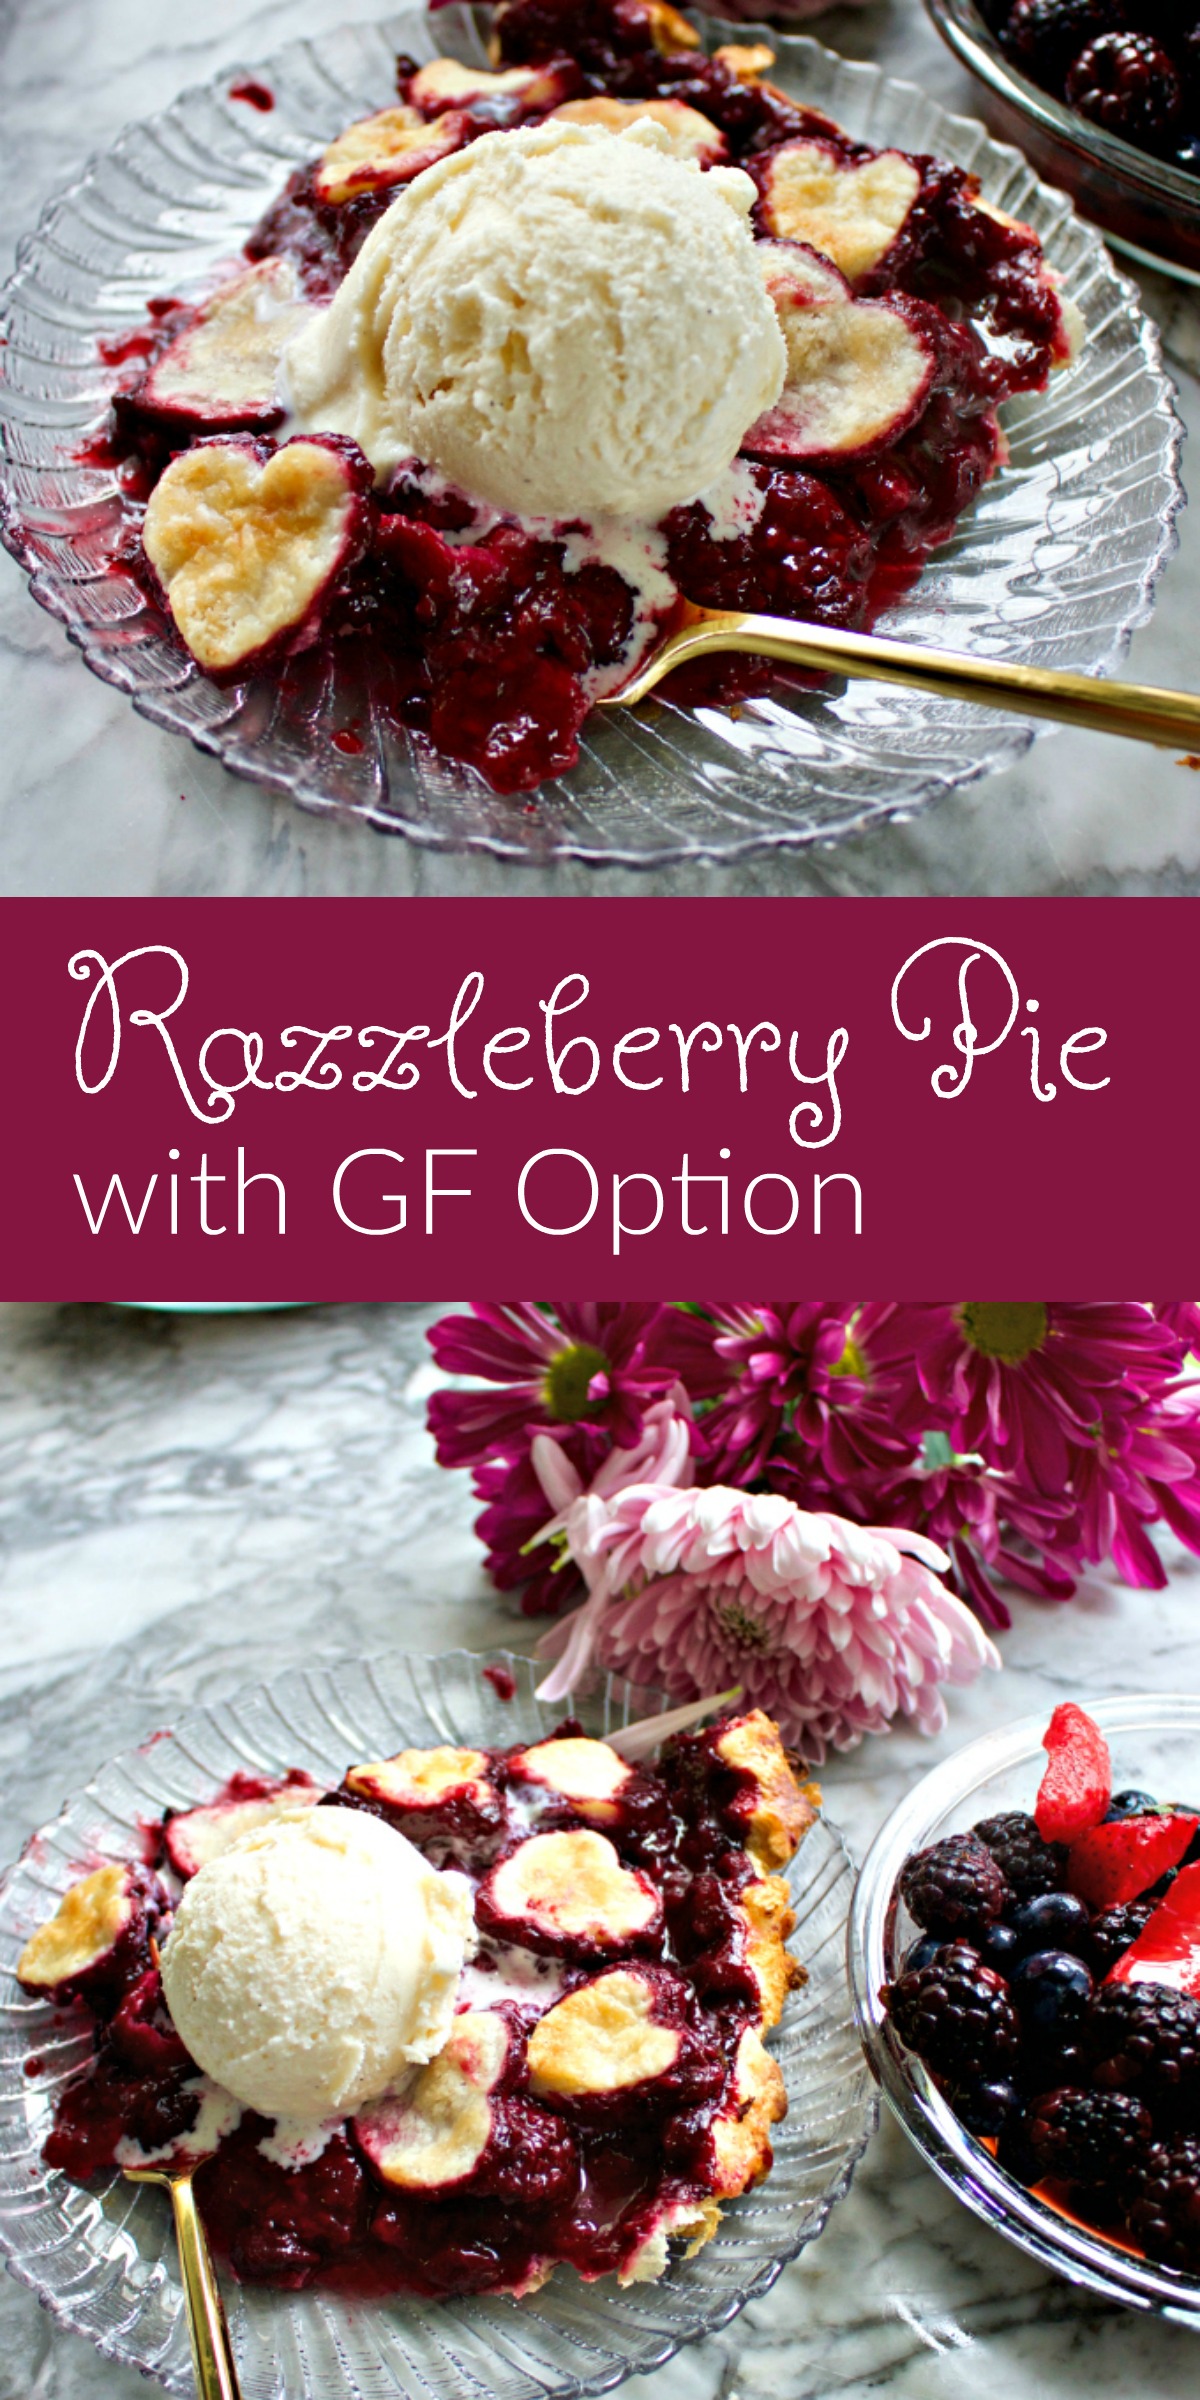 Razzleberry Pie Recipe from Spinach Tiger with Gluten Free Pie option from Spinach Tiger